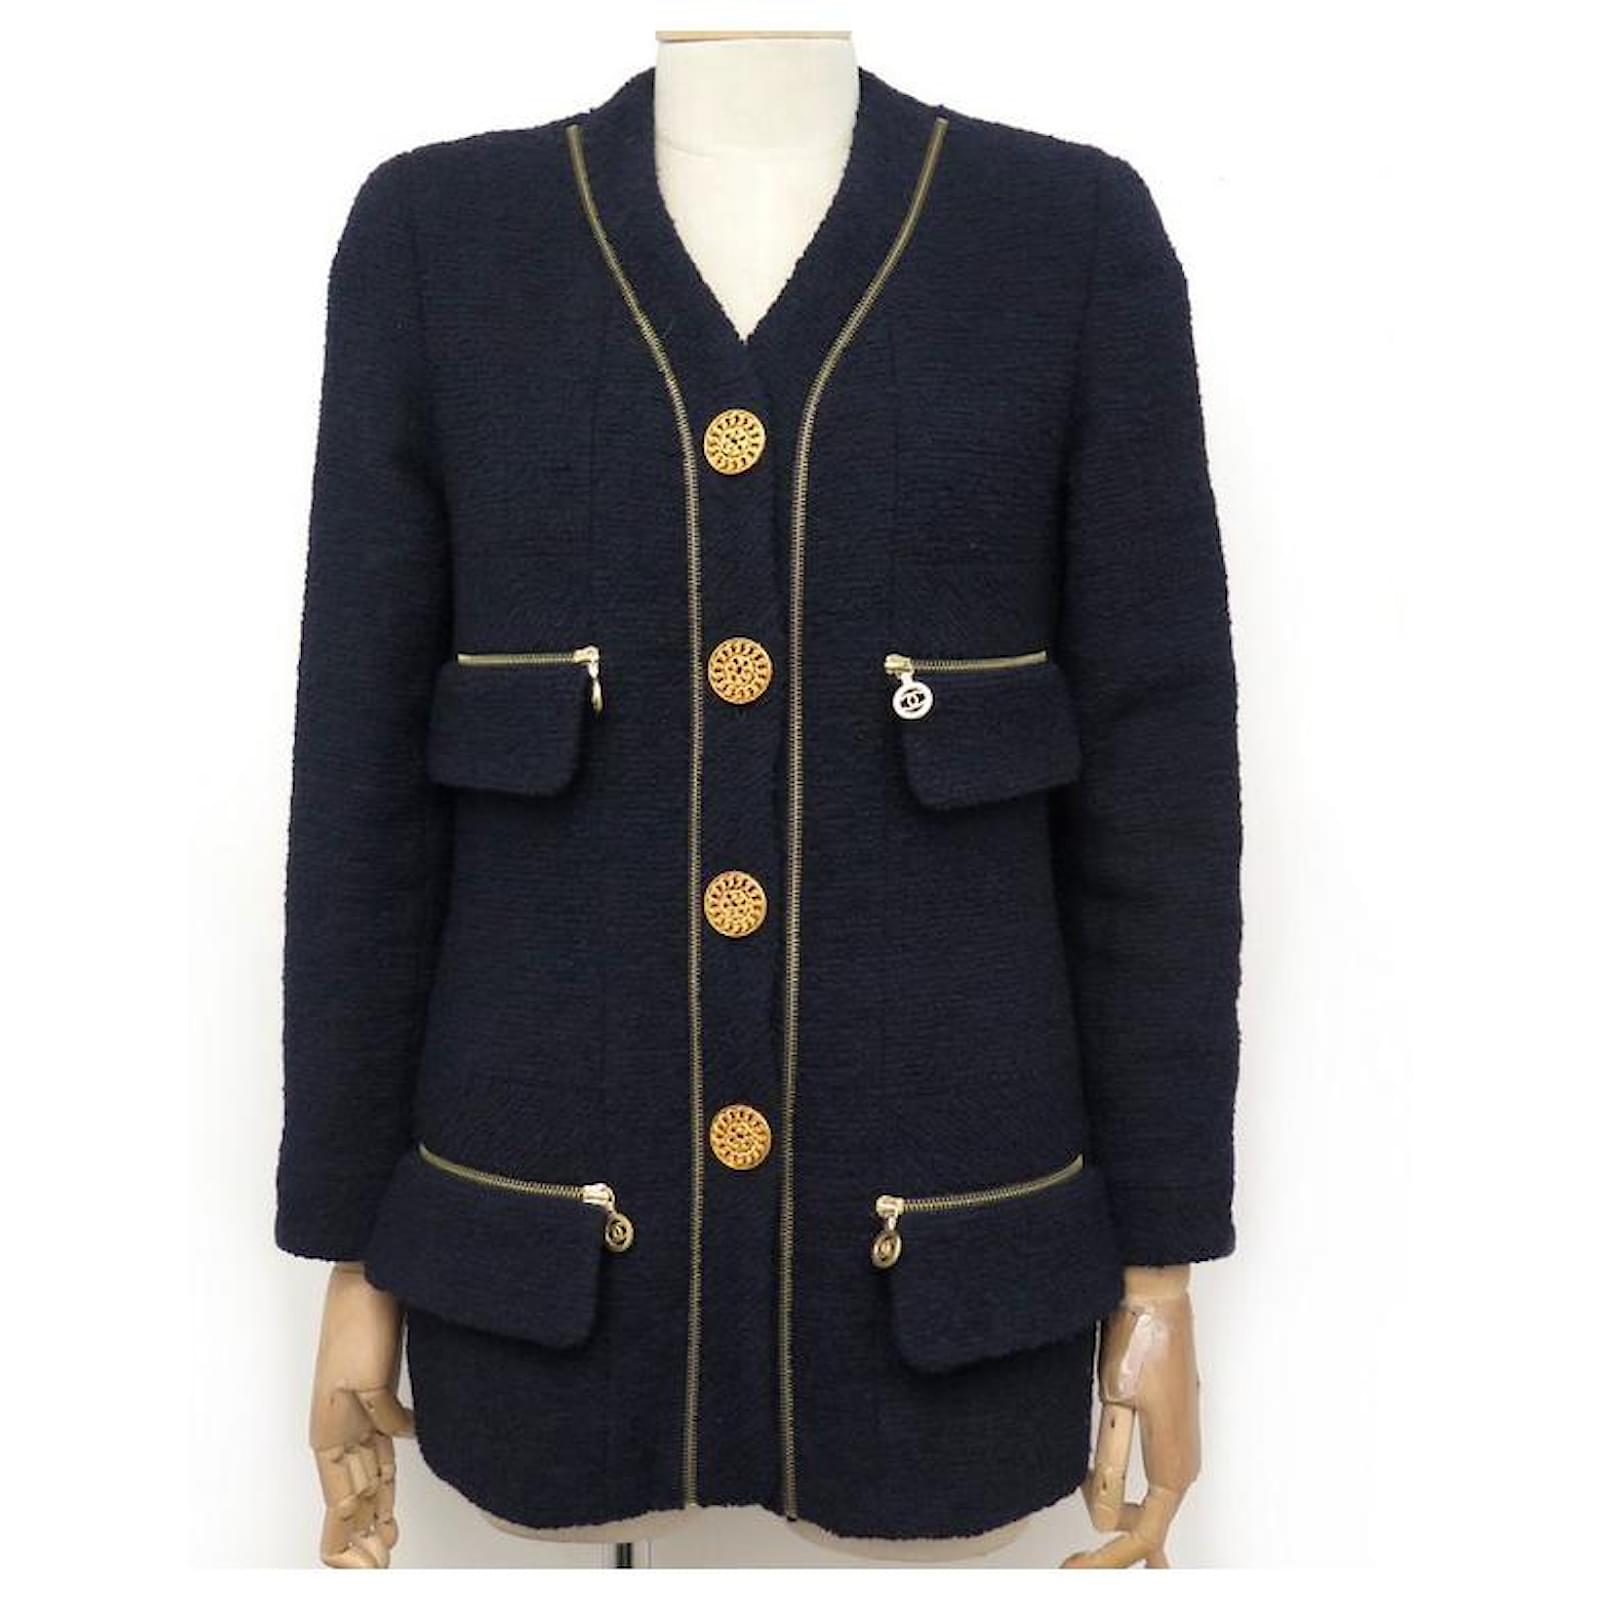 VINTAGE CHANEL JACKET CHAIN BUTTONS S 36 NAVY BLUE WOOL TWEED